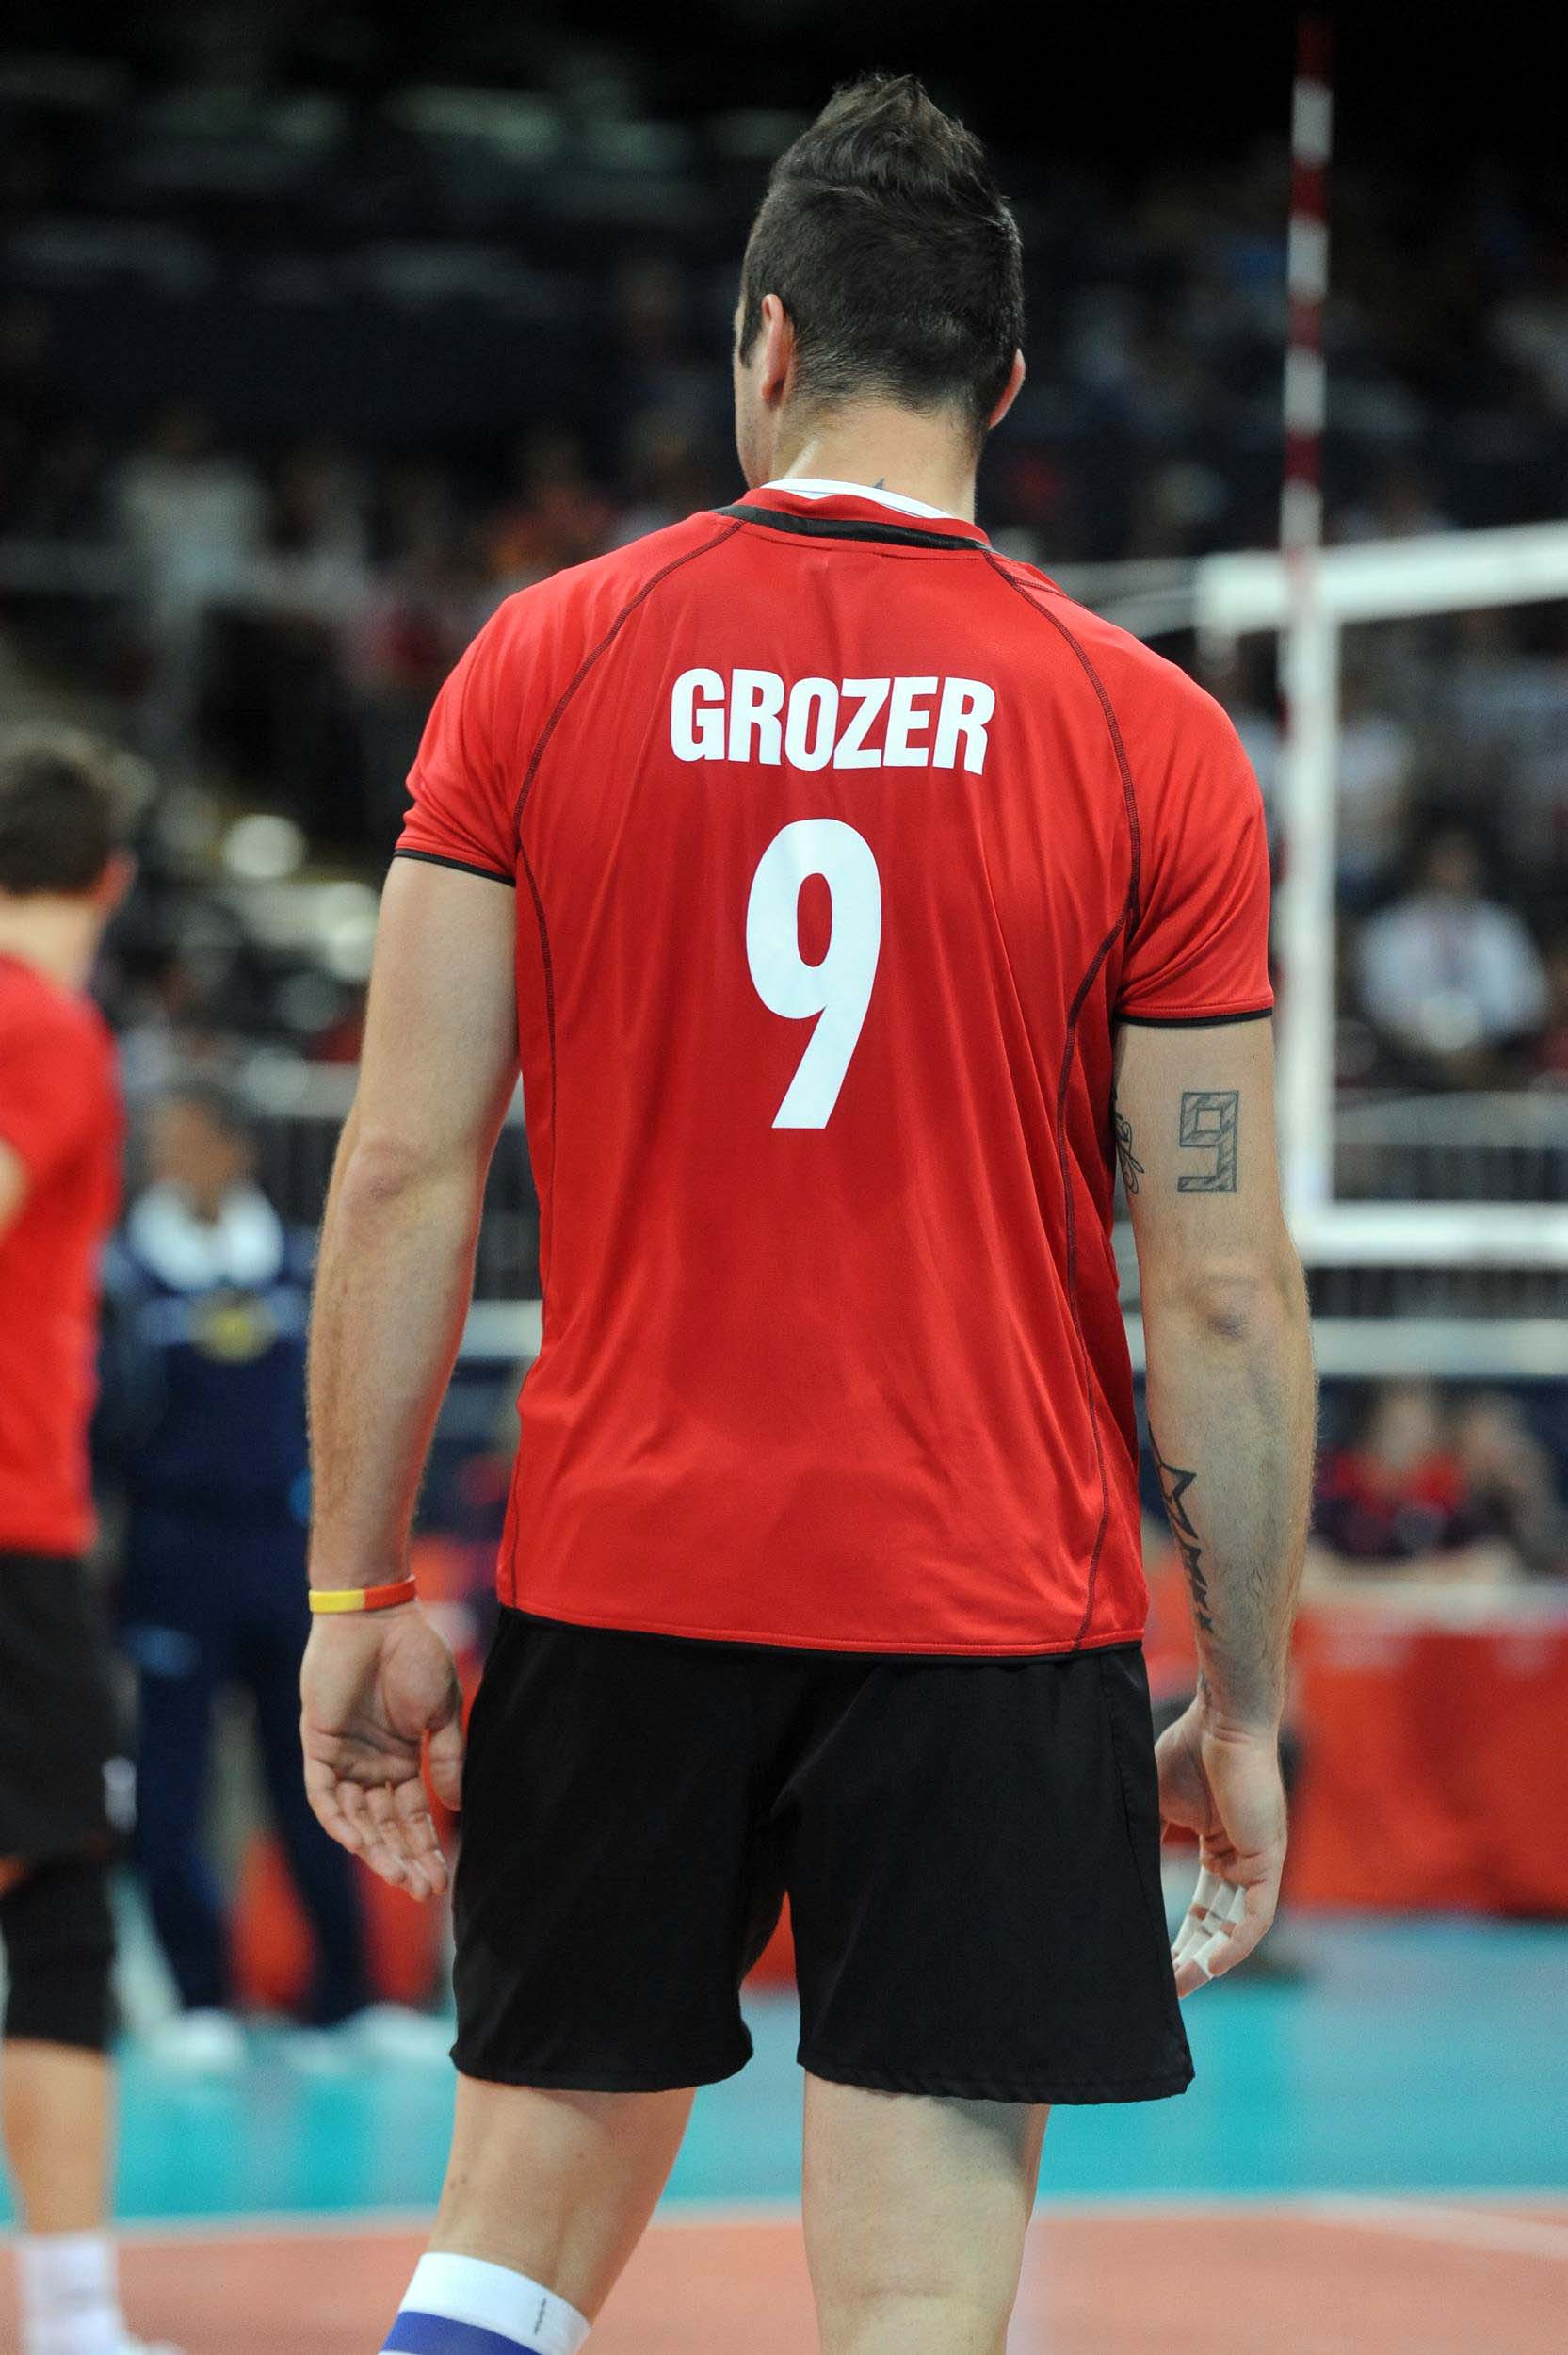 Tattoo number 9 for Germany's Gyrgy Grozer